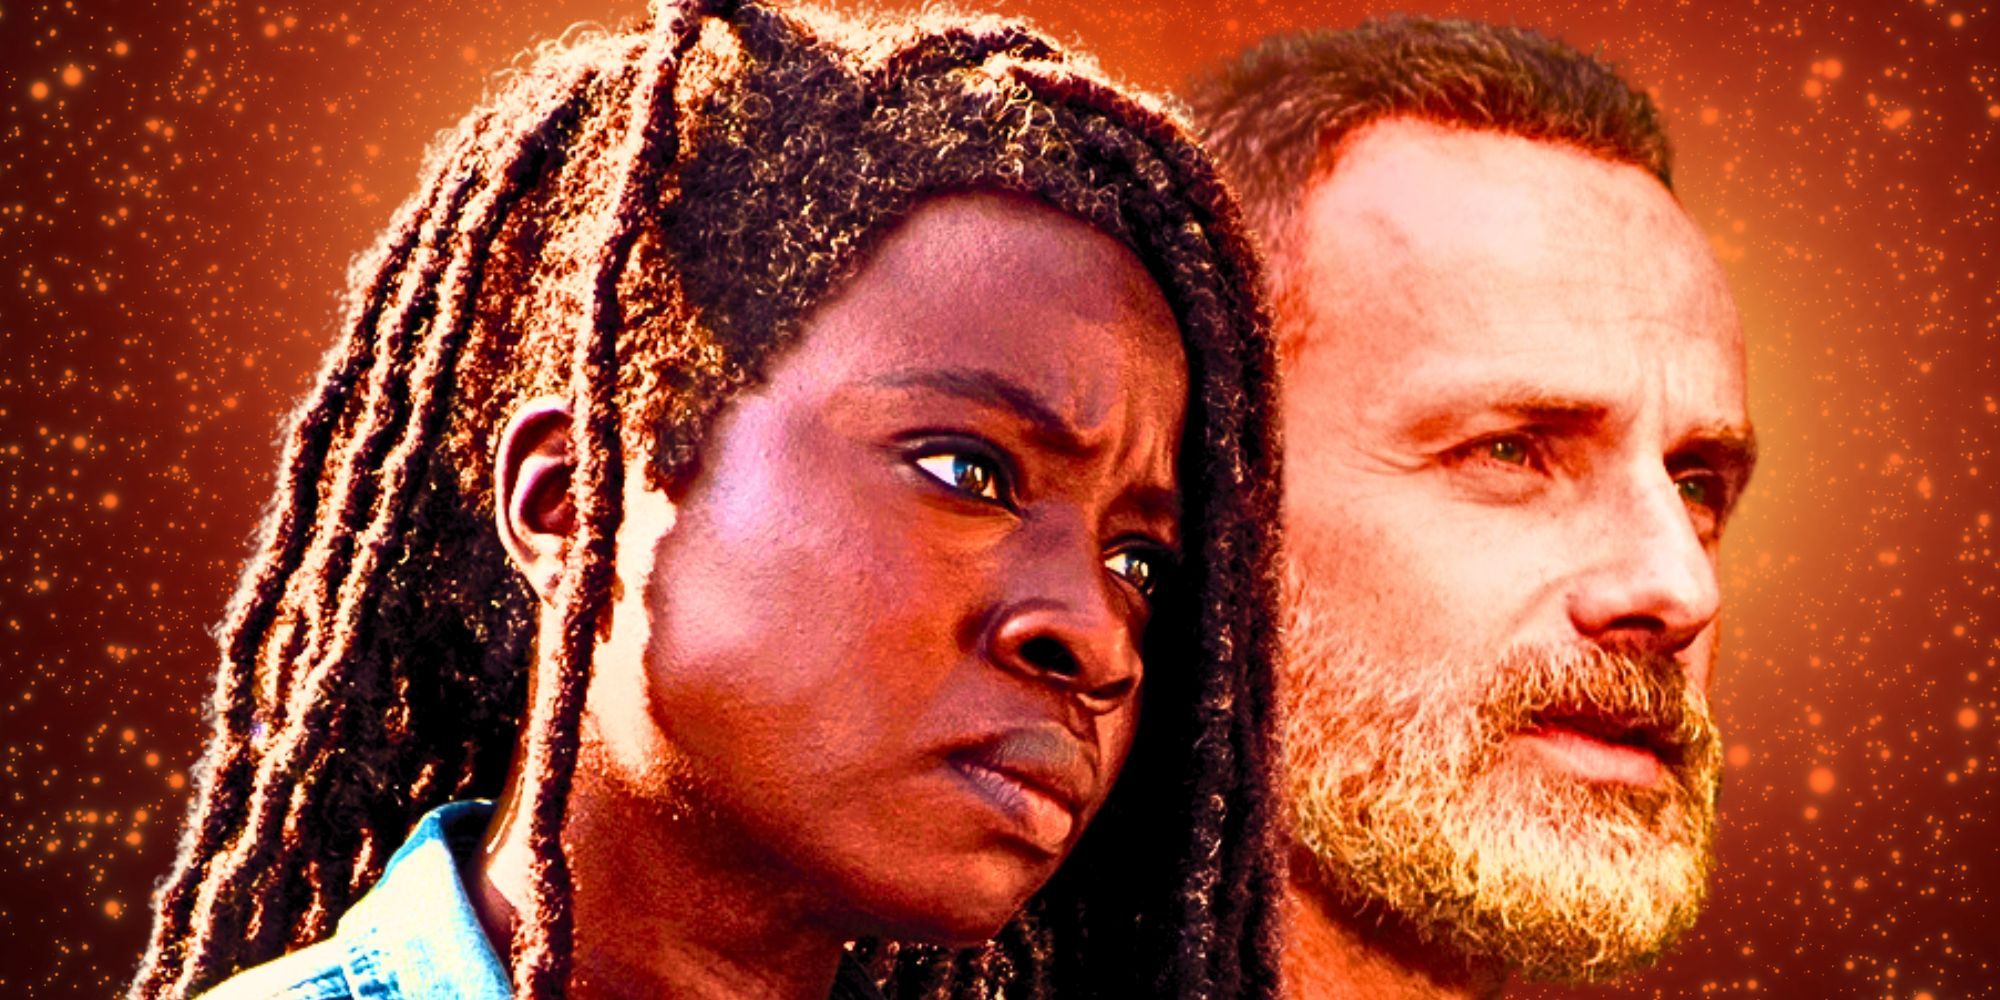 Danai Gurira as Michonne and Andrew Lincoln as Rick Grimes in The Walking Dead: The Ones Who Live